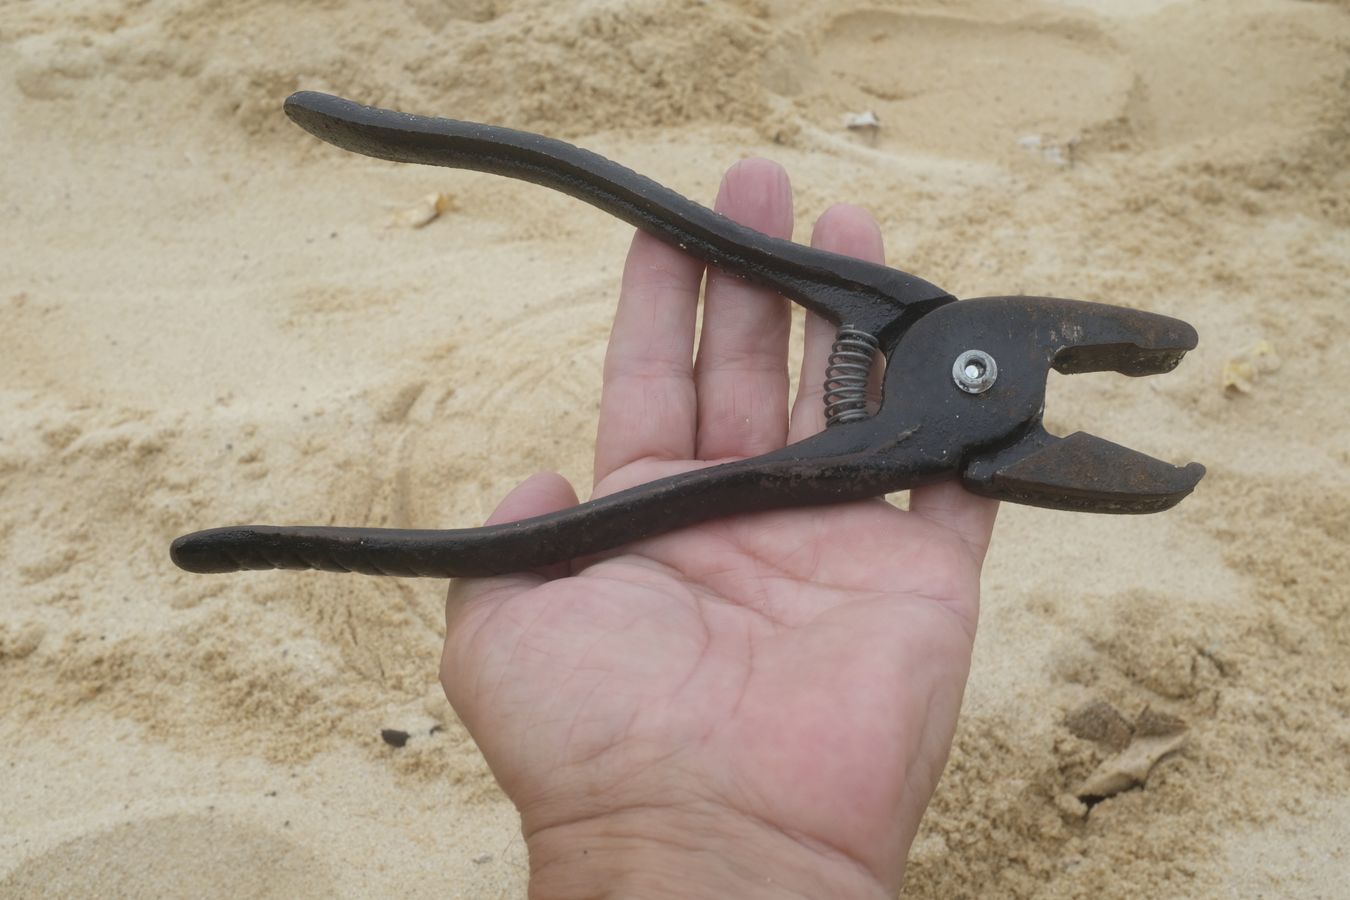 A plier-like tool that rangers use to pierce and insert the small registration number plate in to both front flippers of each sea turtle that comes to nest in Talang Satang National Park.